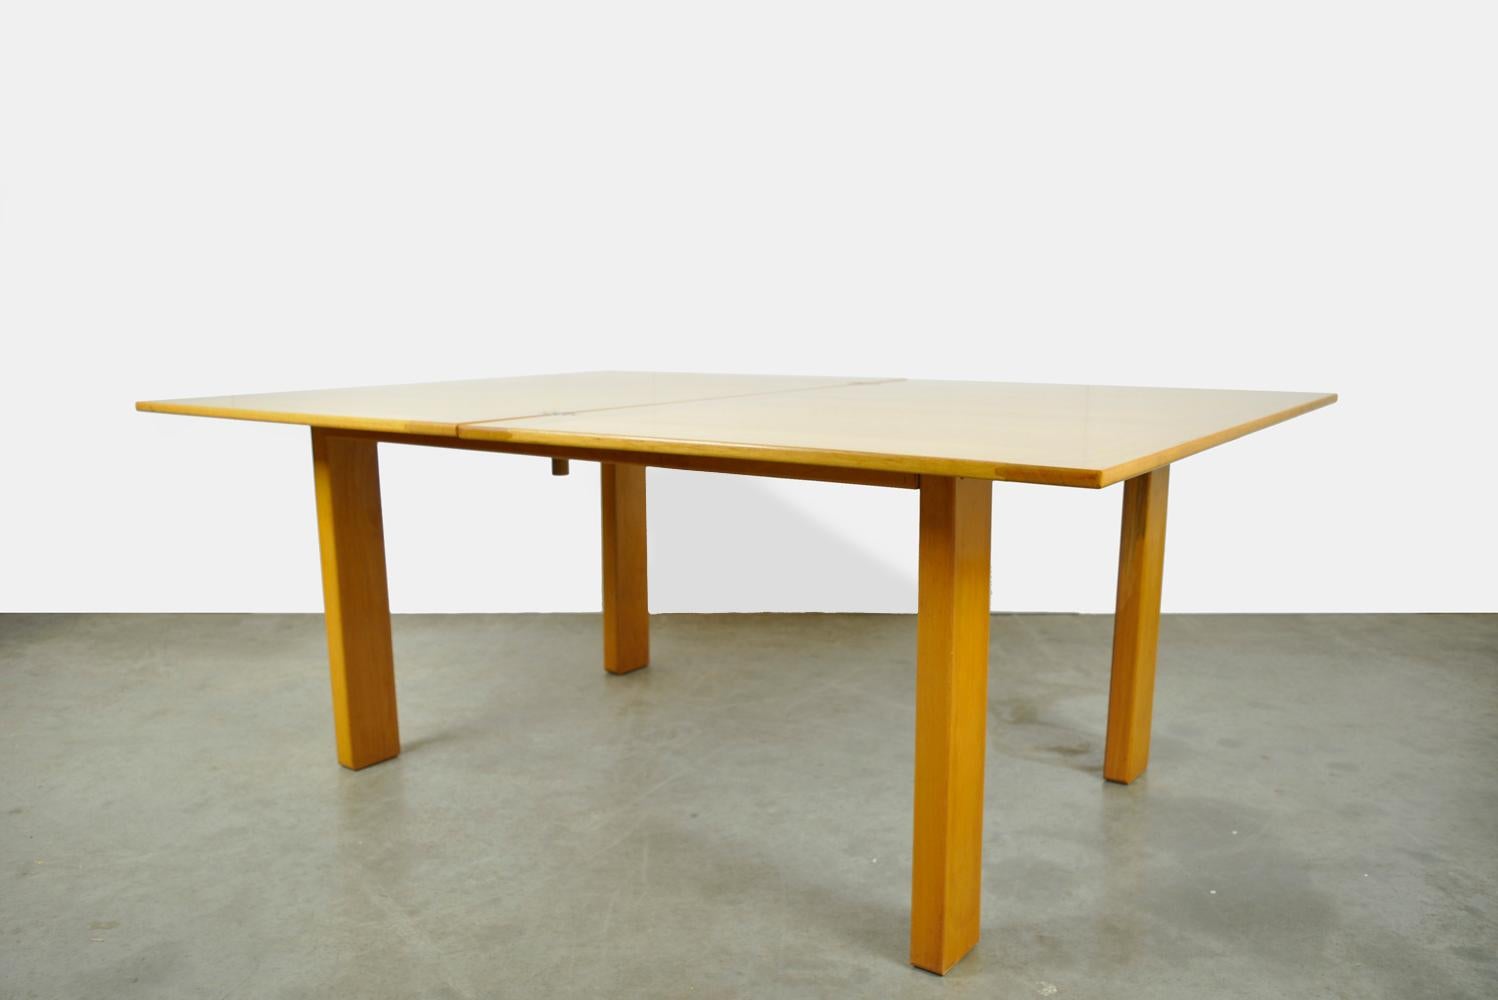 vintage solid beech folding 4-6 seater dining table produced by Ibisco, 1970s Italy. The table has an ingenious system of enlargement. The blade is rotated 90 degrees and then unfolded. In this way a twice as large leaf is created for 6-8 persons.